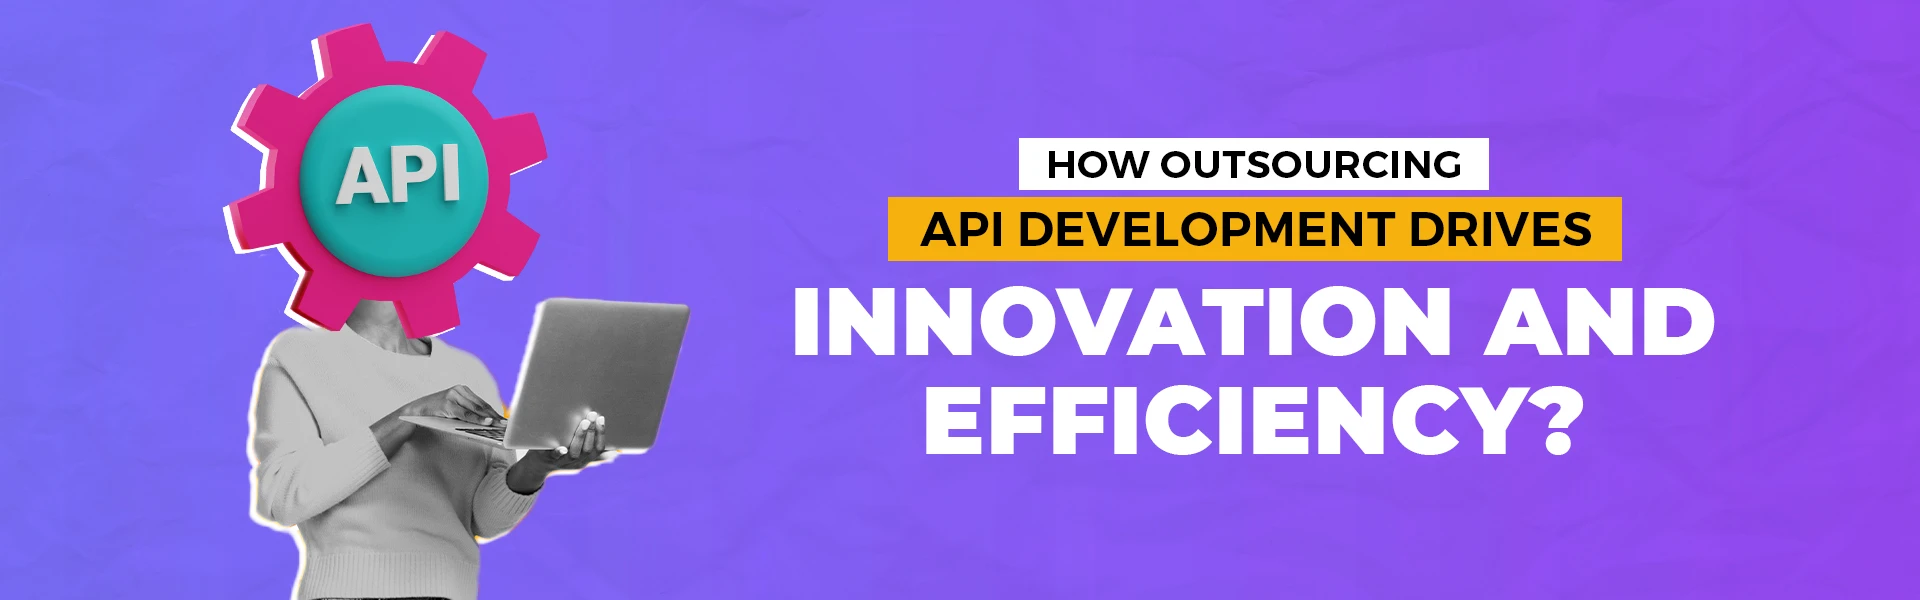 outsourcing api development drives innovation and efficiency